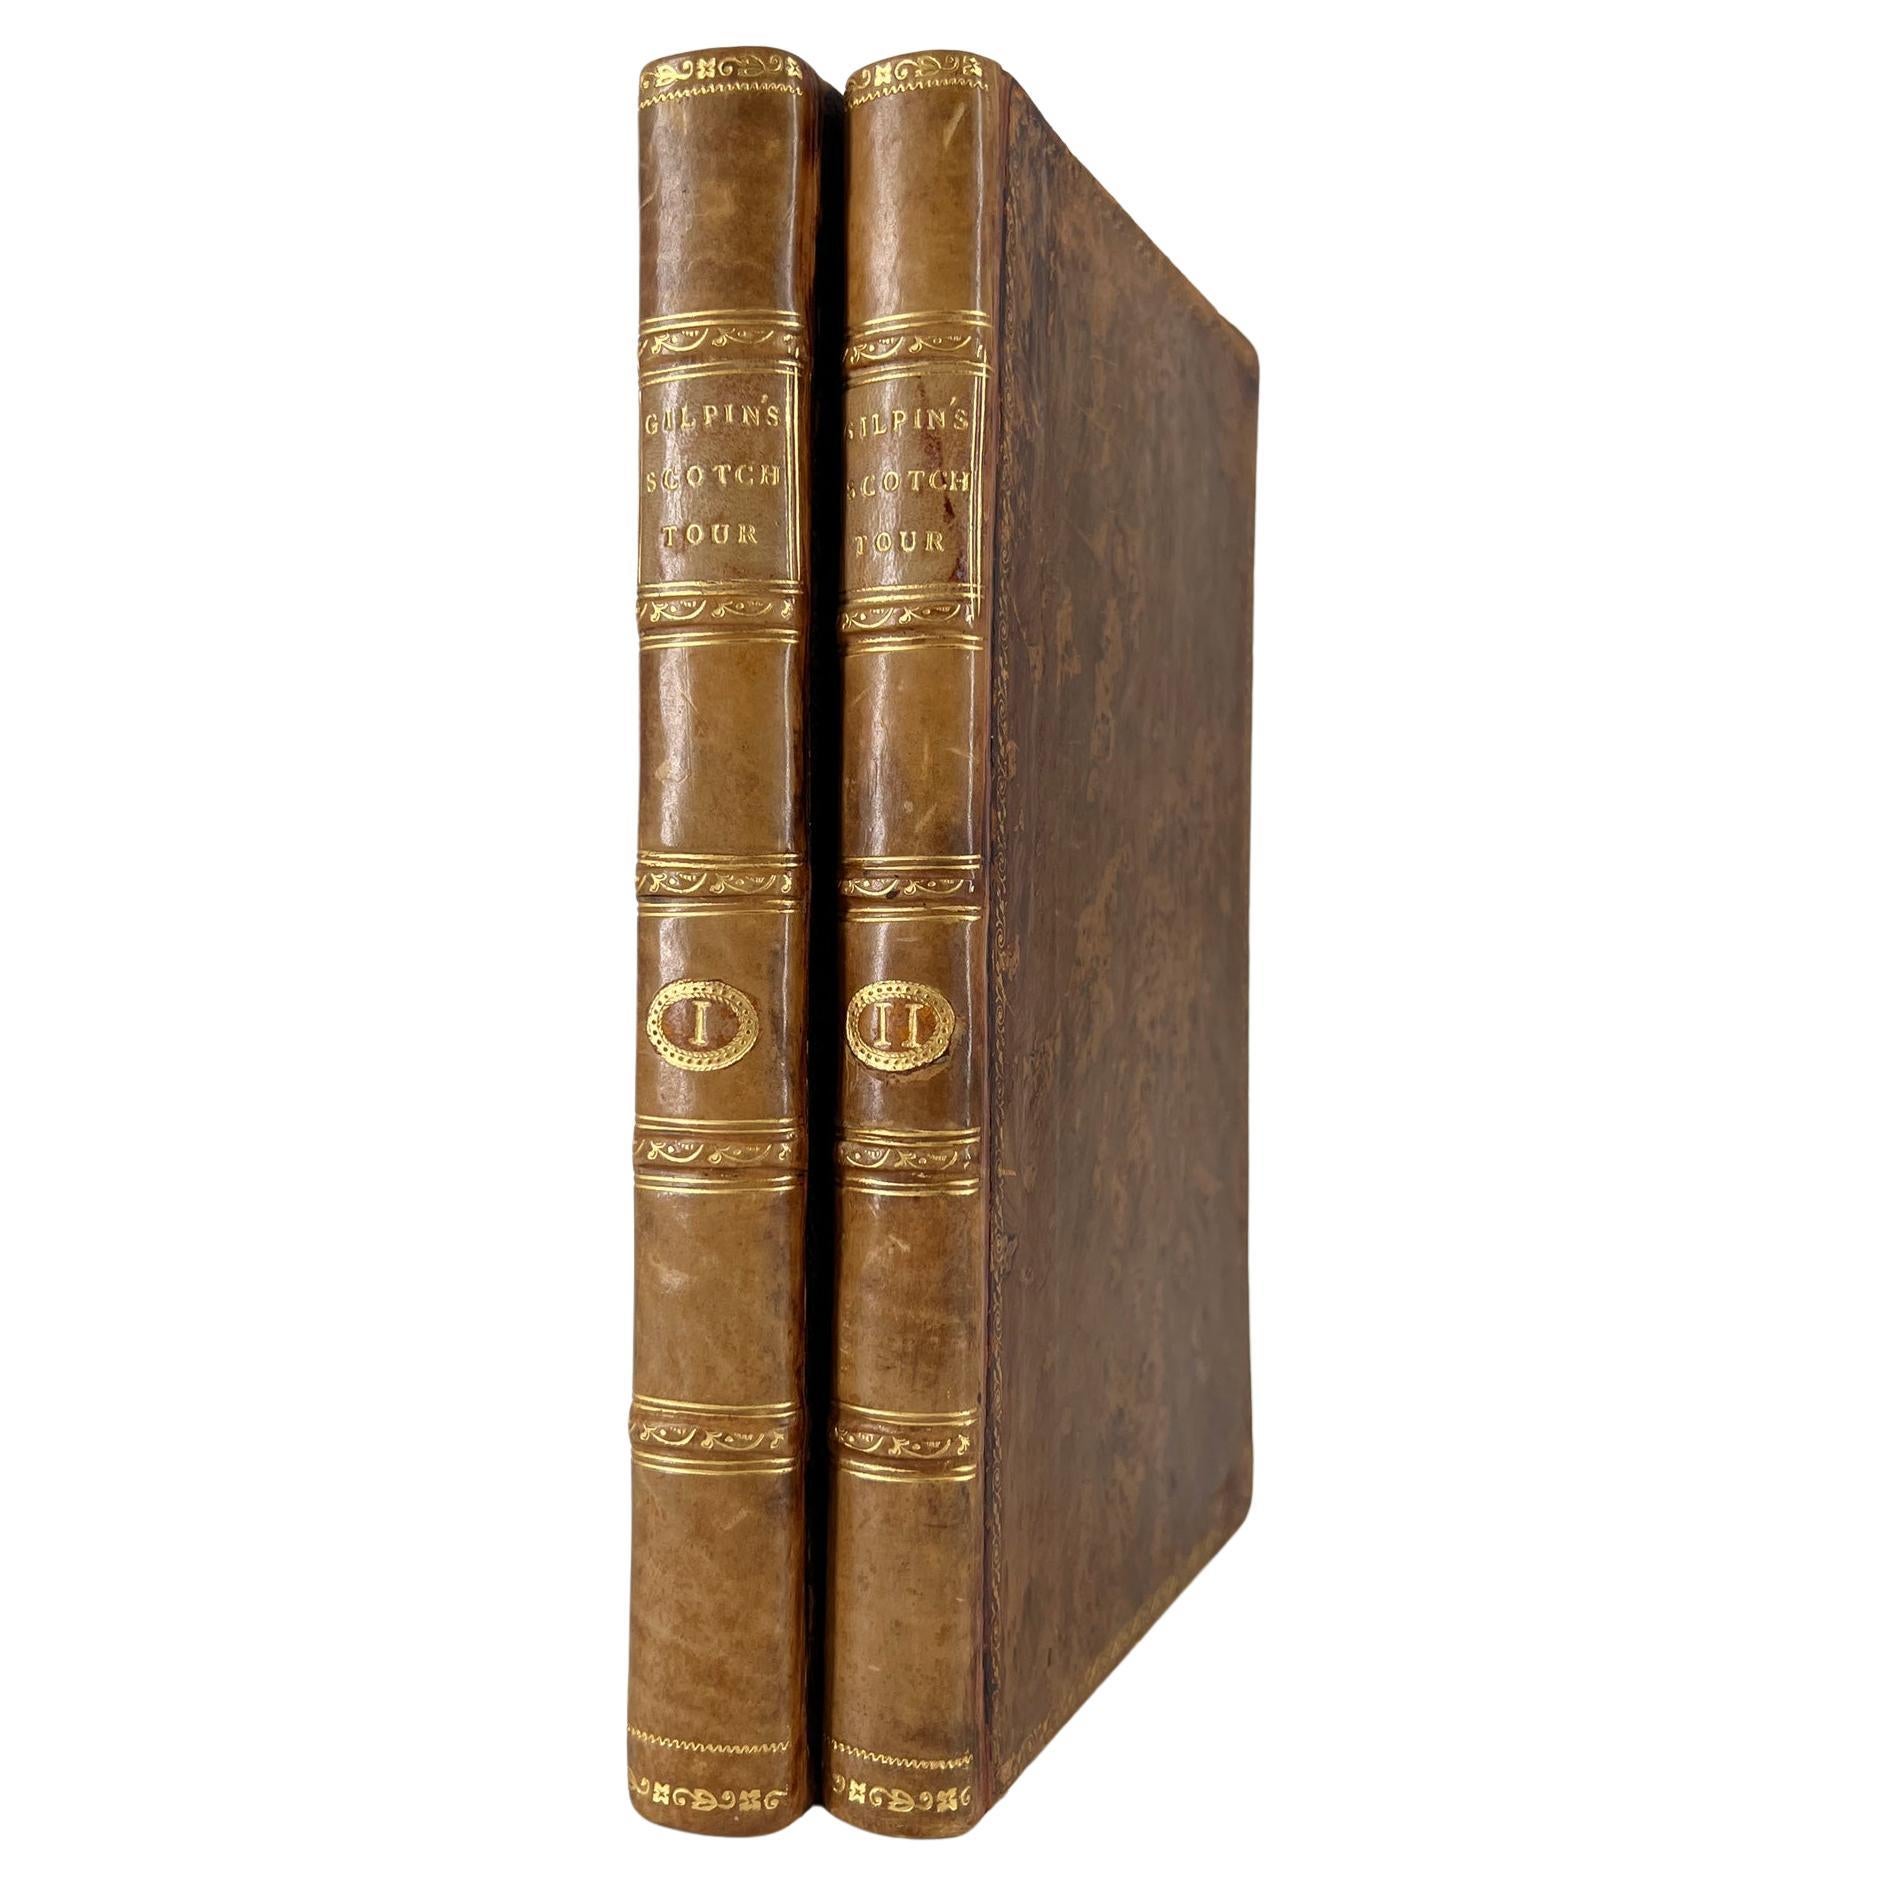 Gilpin, Wm: Observations... on Great Britain, and High-Lands of Scotland, 2 vols For Sale